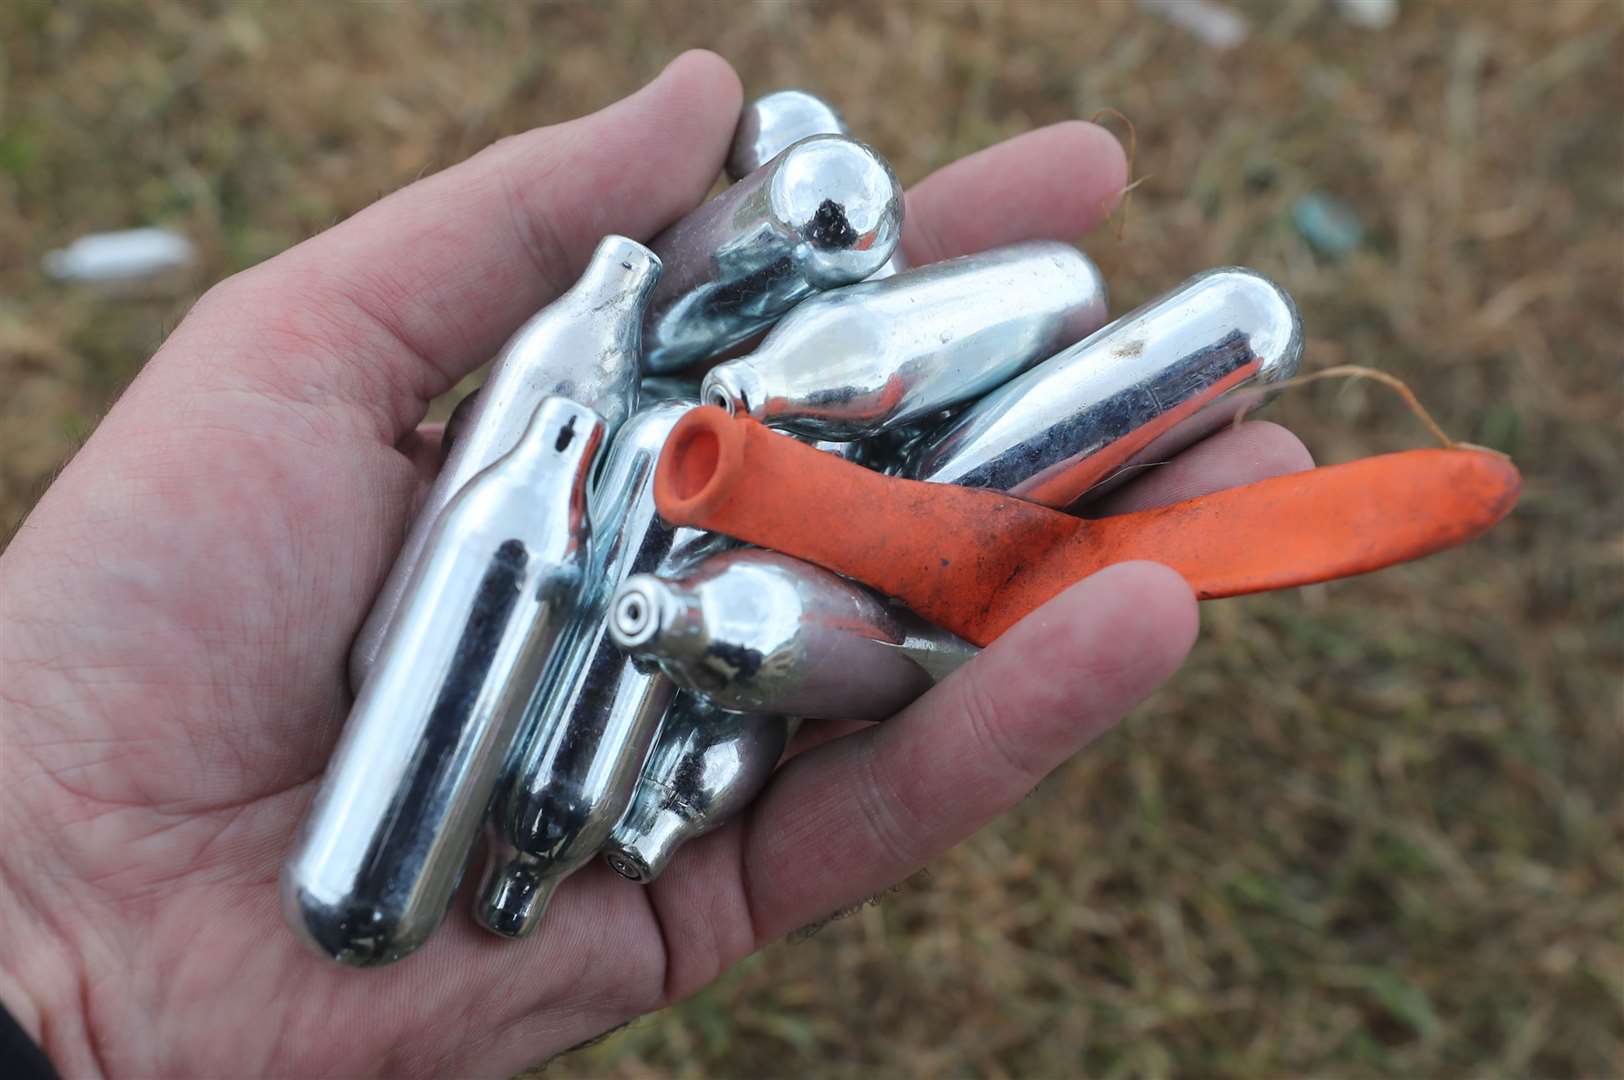 Mr Sunak criticised people who discarded nitrous oxide canisters in playgrounds (Niall Carson/PA)